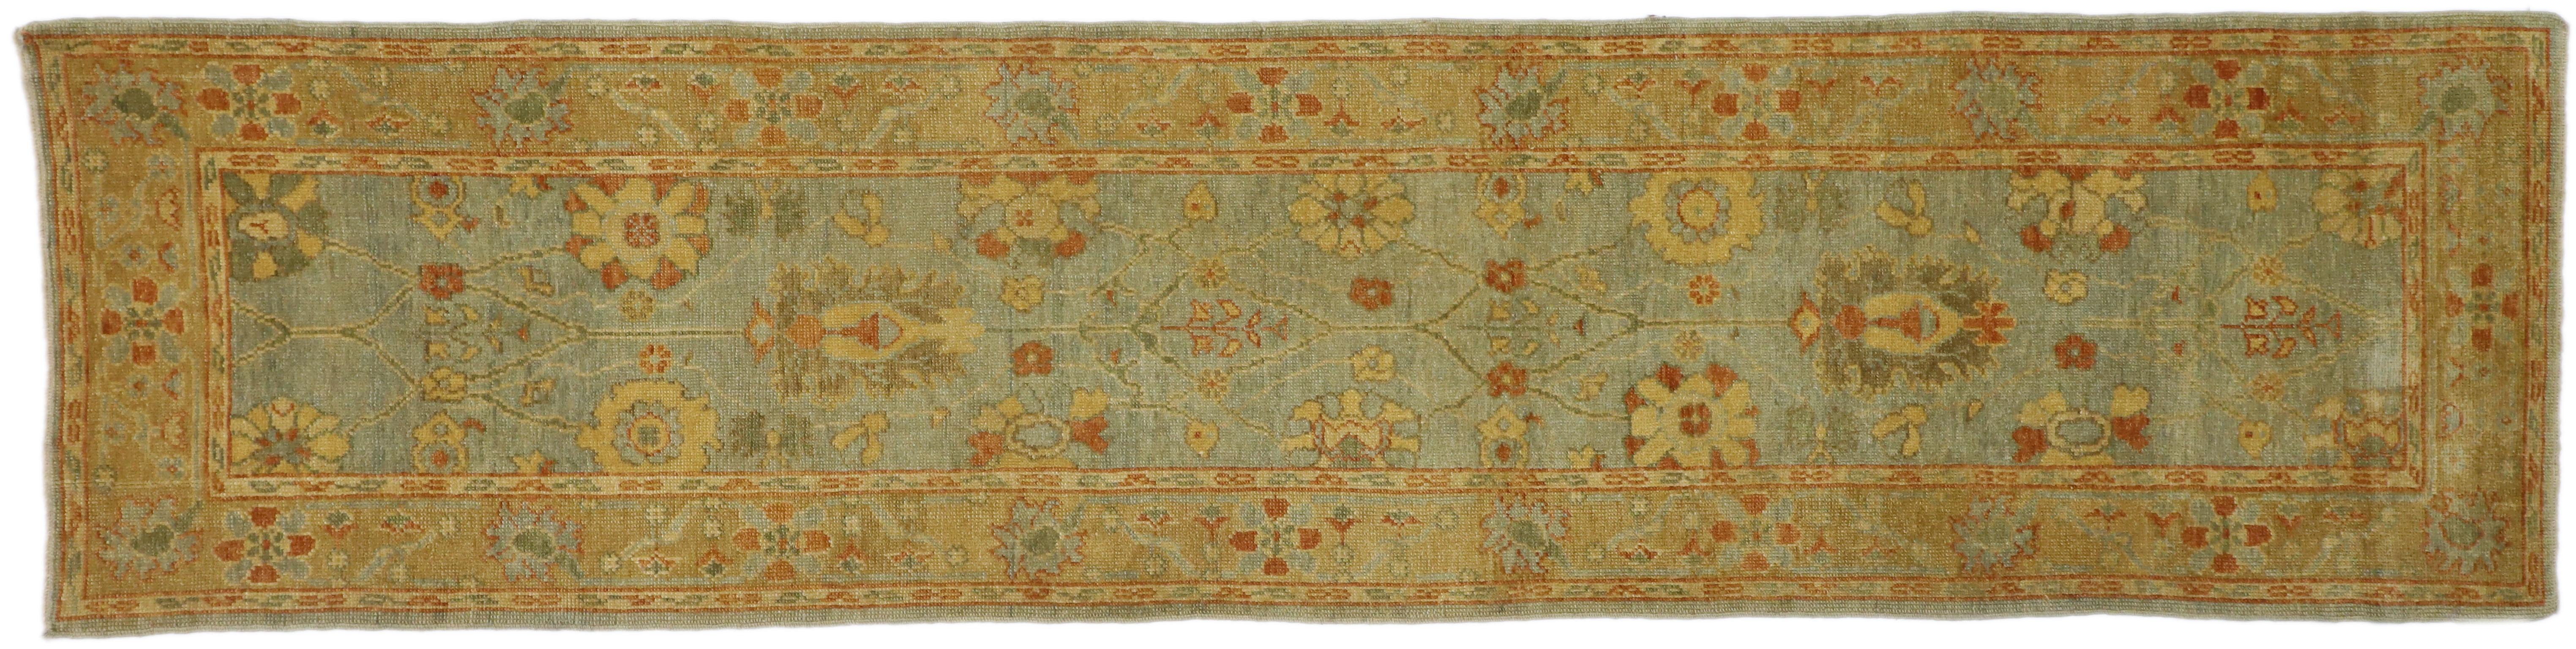 New Contemporary Turkish Oushak Runner with Warm, Mediterranean Style For Sale 4